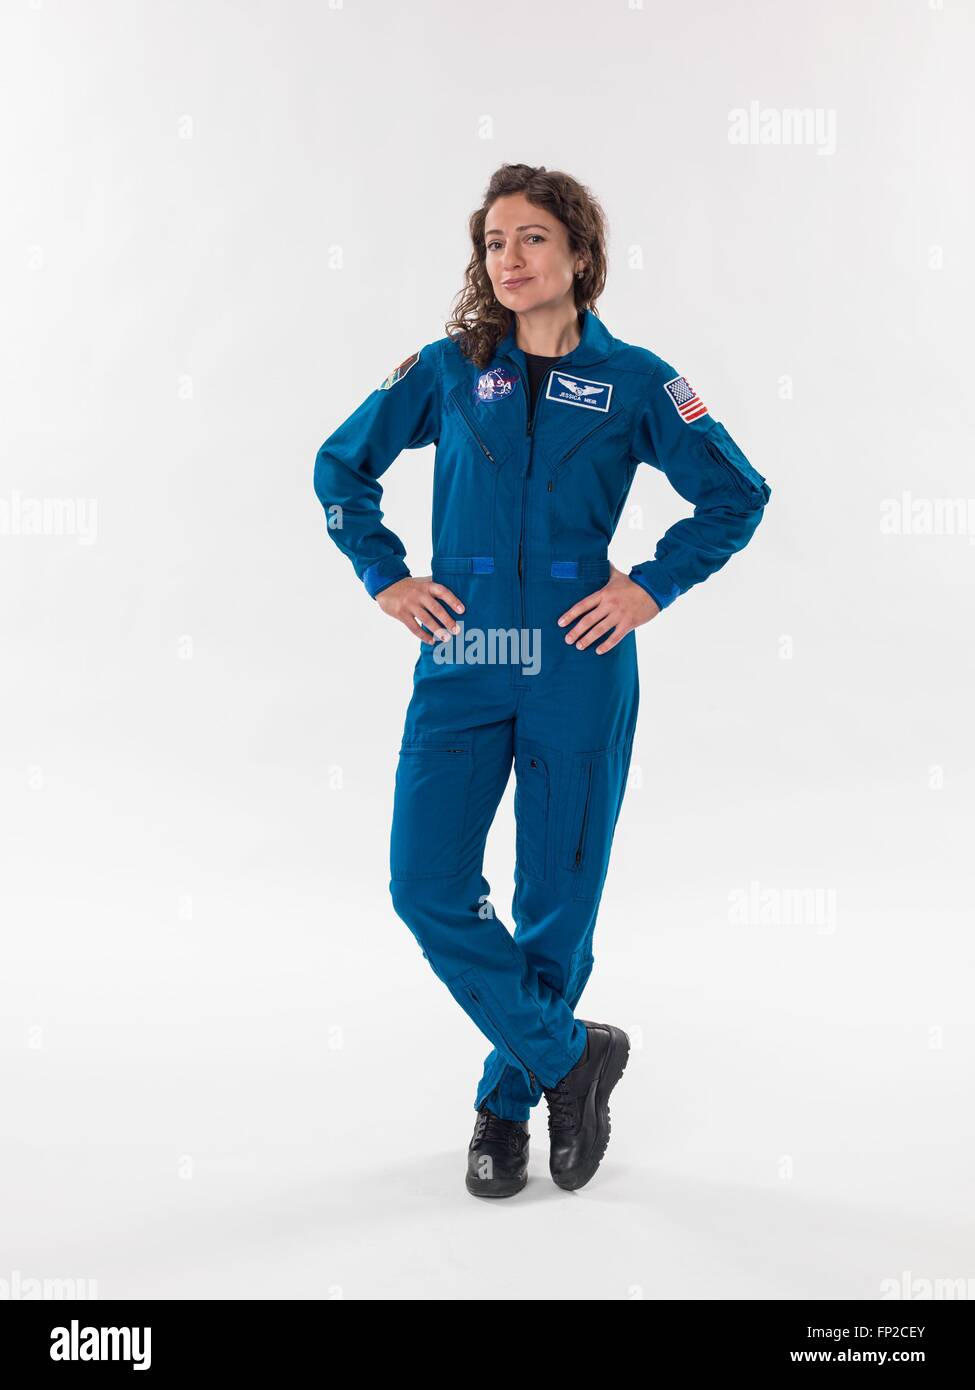 American astronaut Jessica Meir official portrait wearing blue flight suit at the Johnson Space Center February 24, 2016 in Houston, Texas. Stock Photo